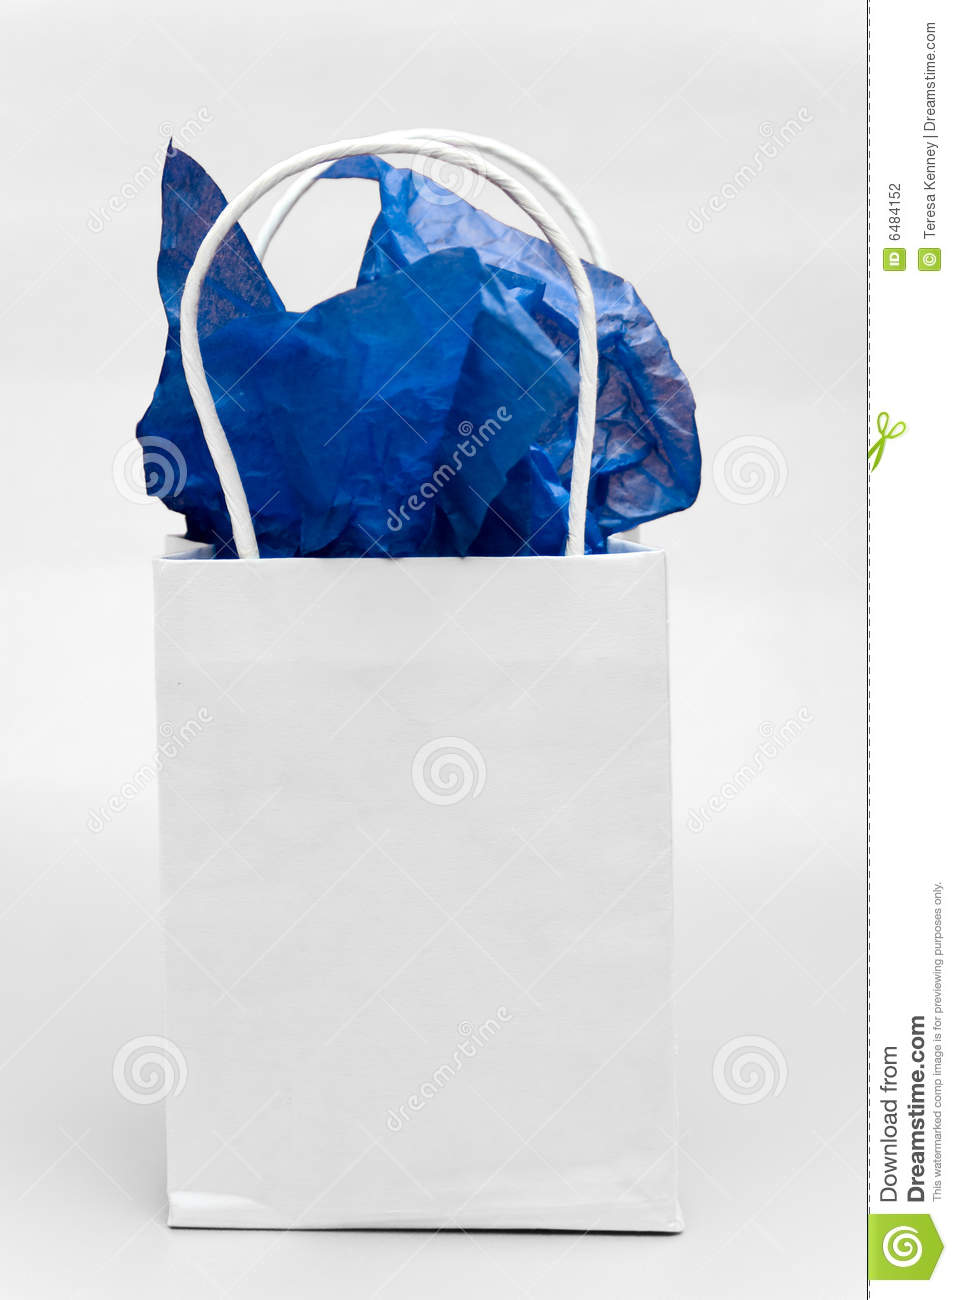 White Gift Bag With Blue Tissue Paper Against A Light Background 